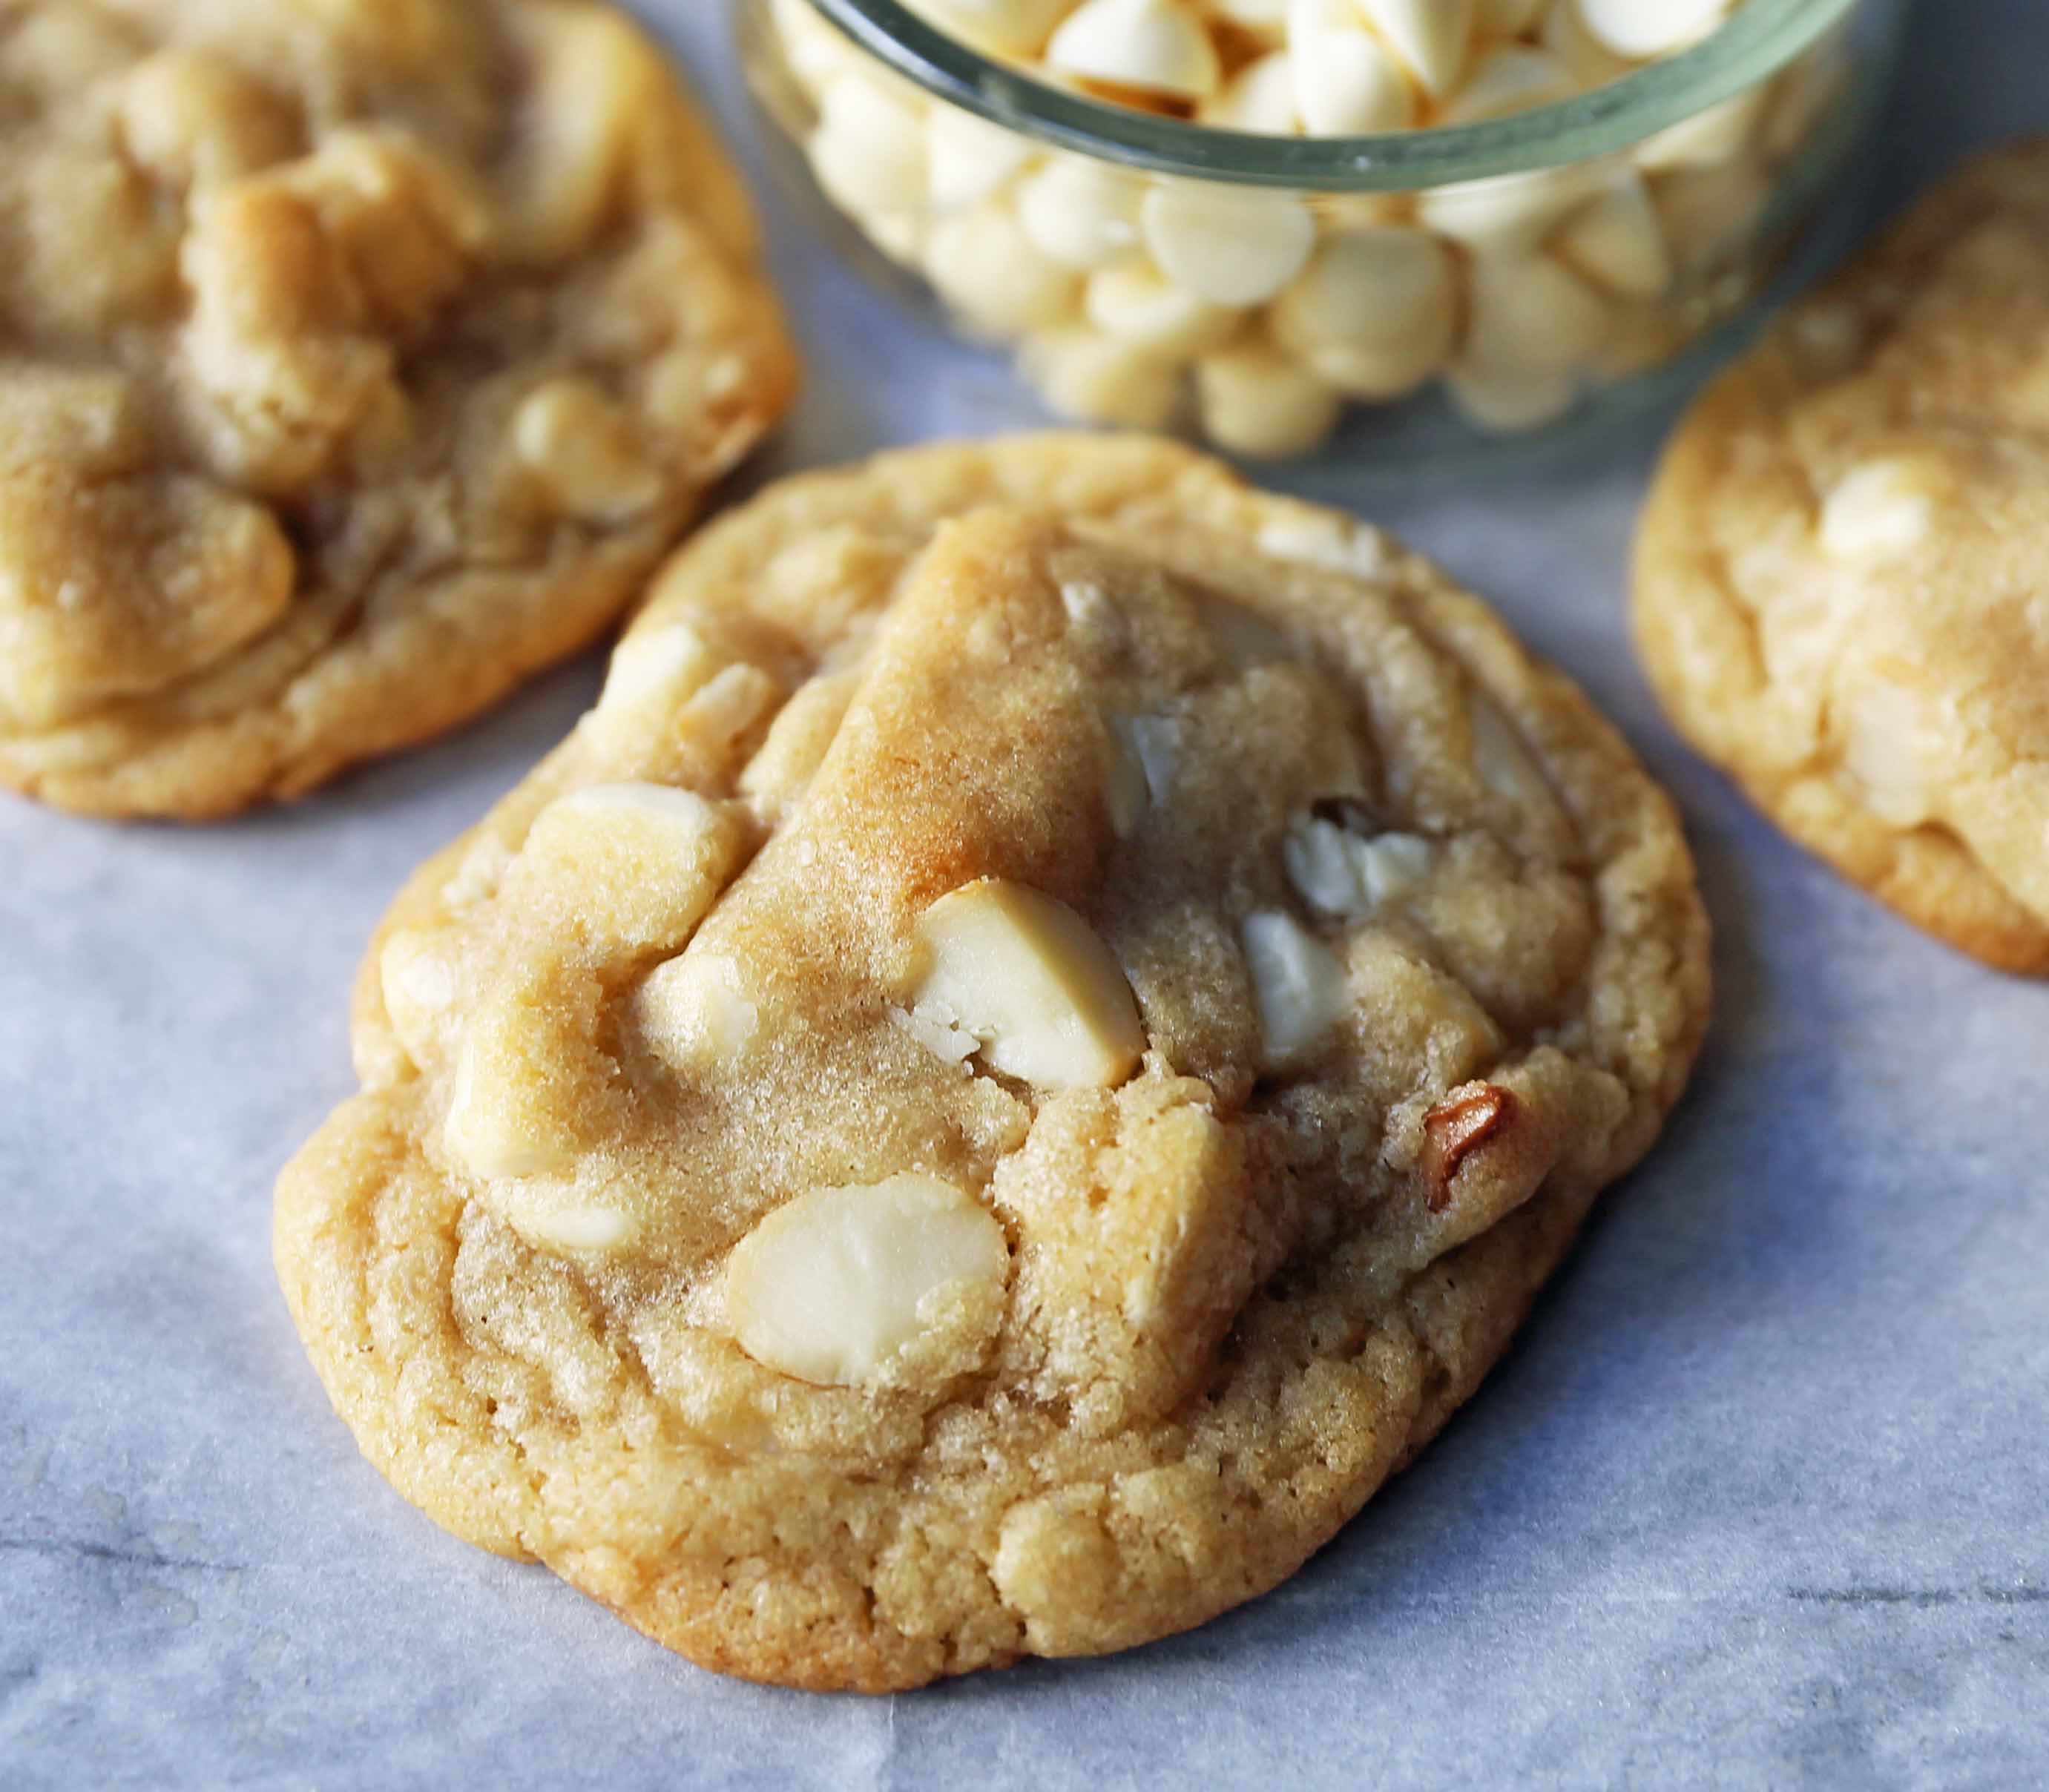 White Chocolate Macadamia Nut Cookies. Soft chewy white chocolate macadamia nut cookies are a sweet, buttery cookie and are always a crowd pleaser! www.modernhoney.com #whitechocolate #whitechocolatecookies #whitechocolatemacadamia #whitechocolatemacadamianutcookies #cookies #cookierecipe